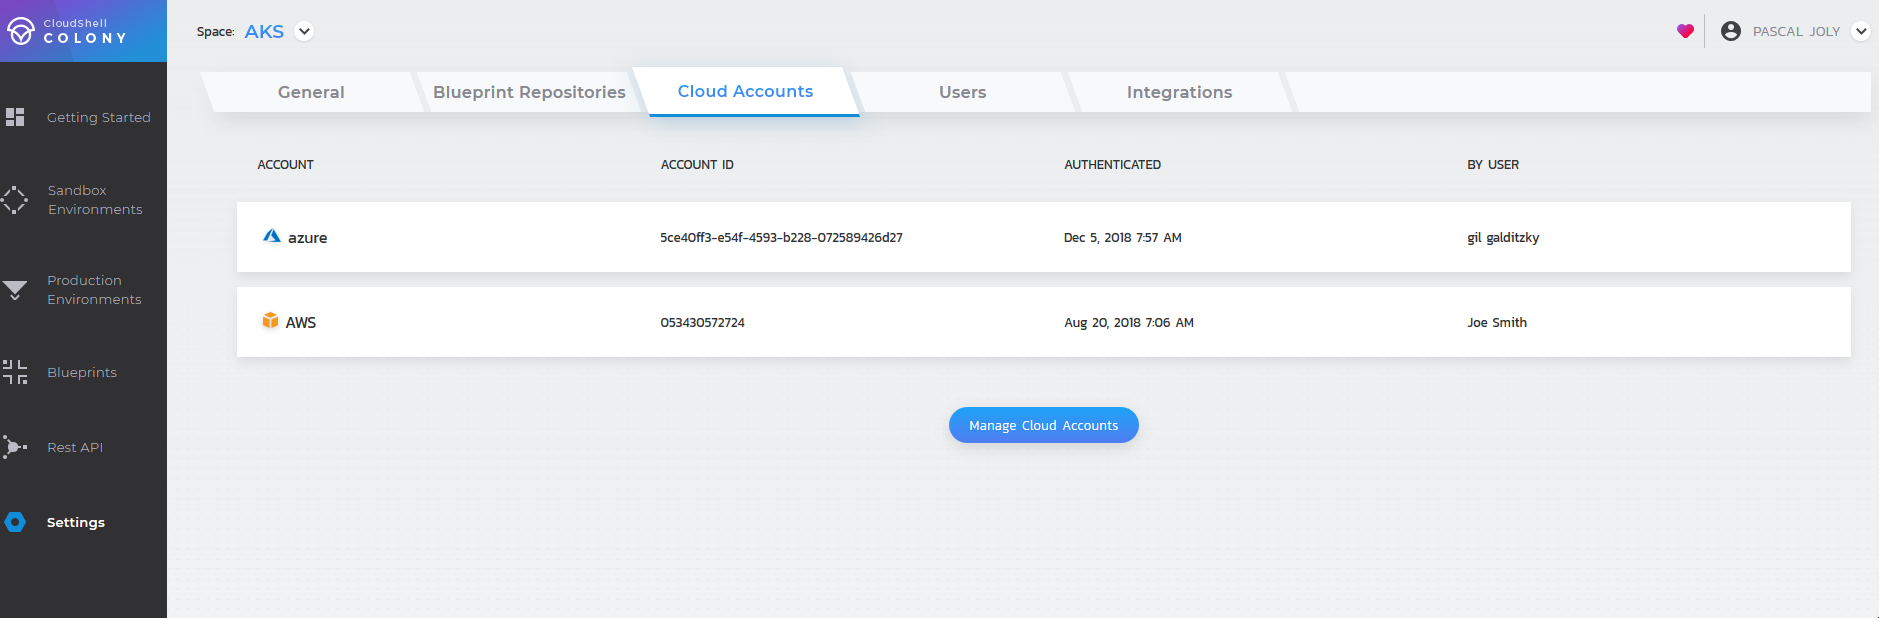 Define your cloud account using CloudShell Colony